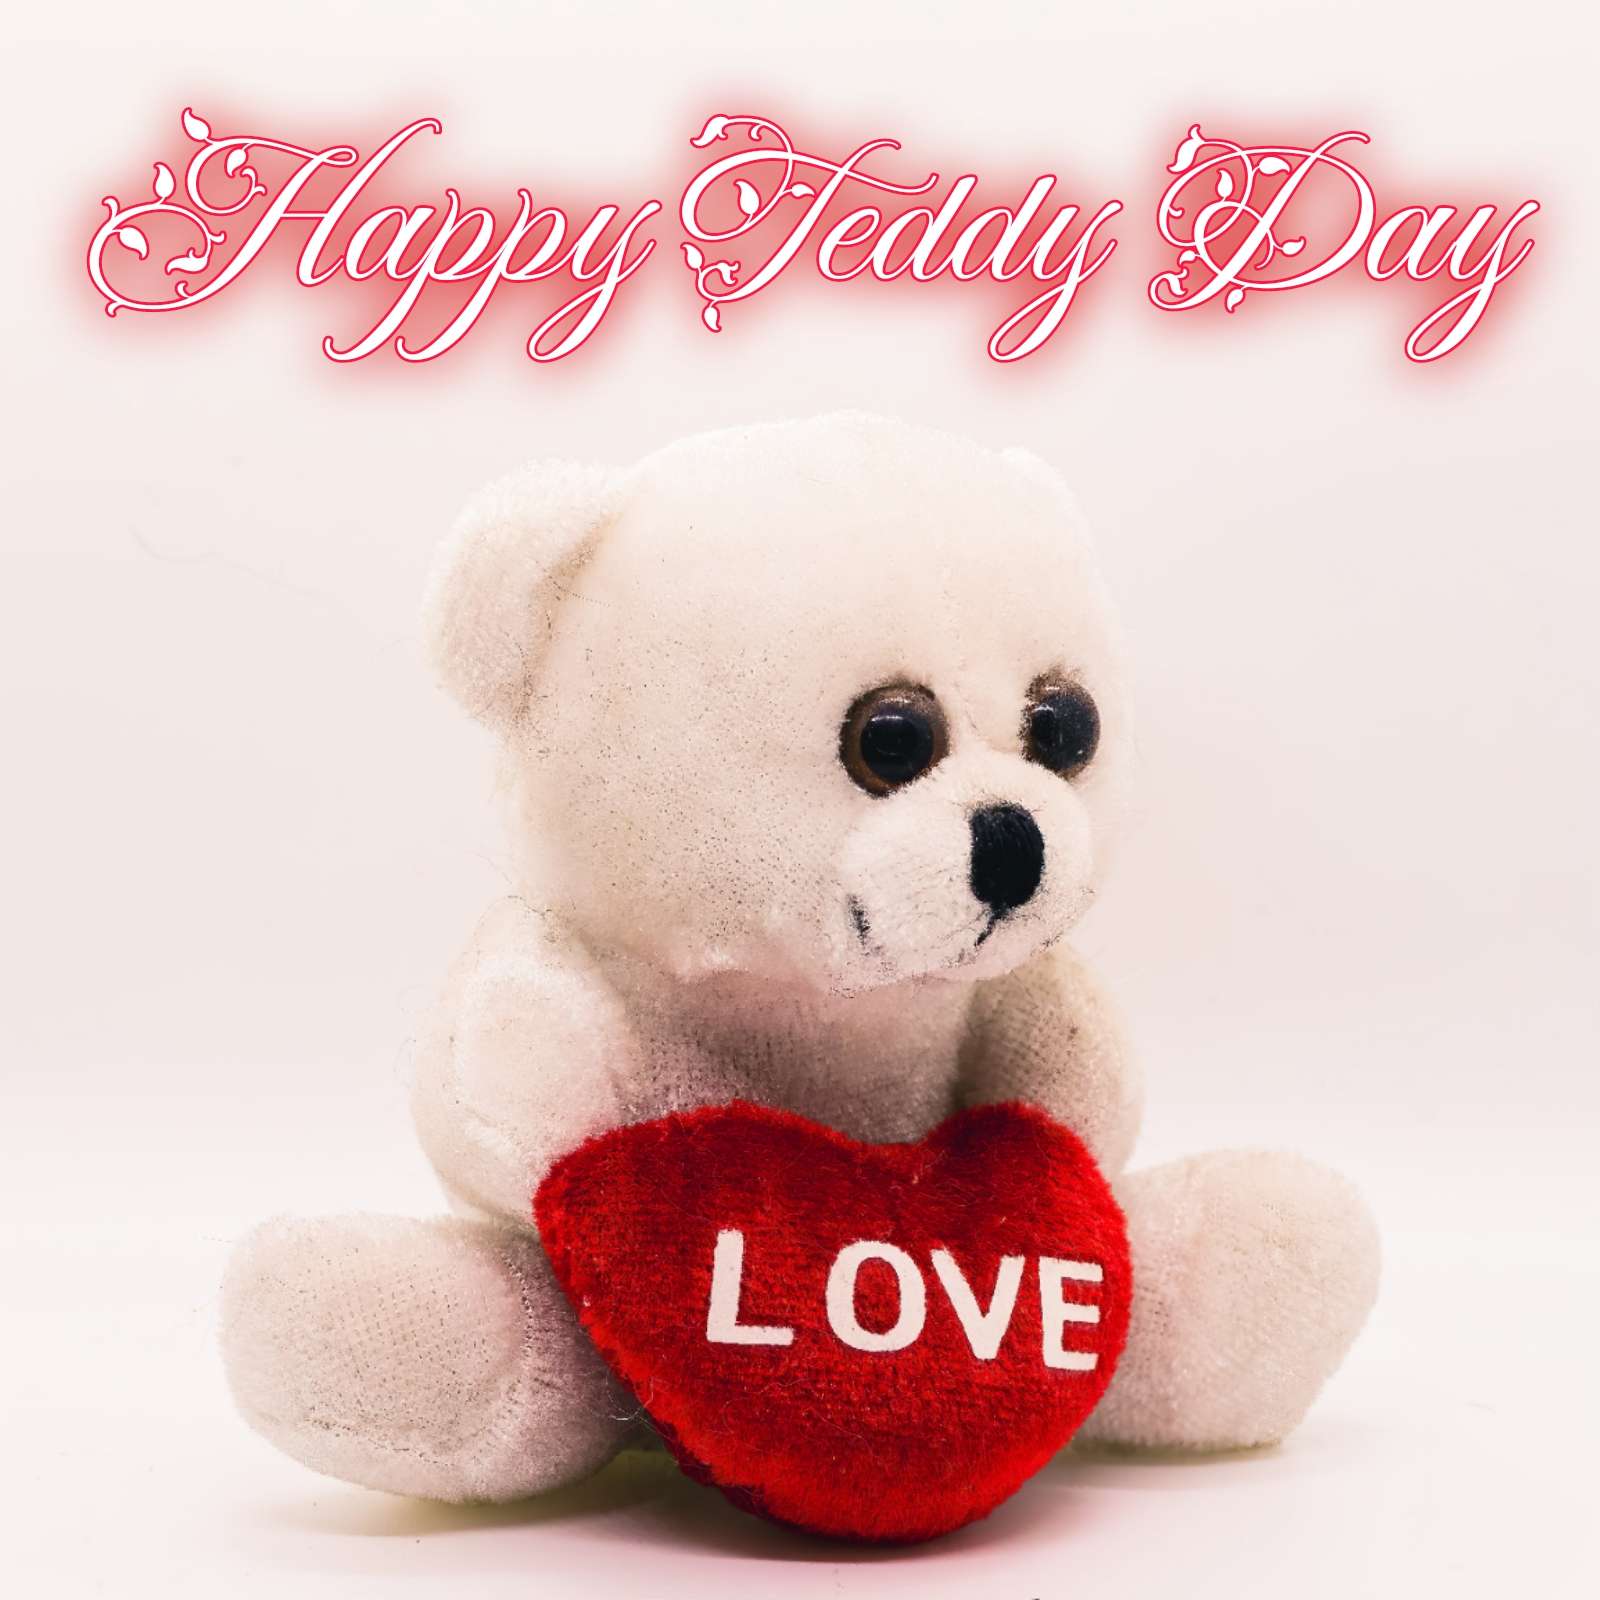 Happy Teddy Bear Day Pic Download